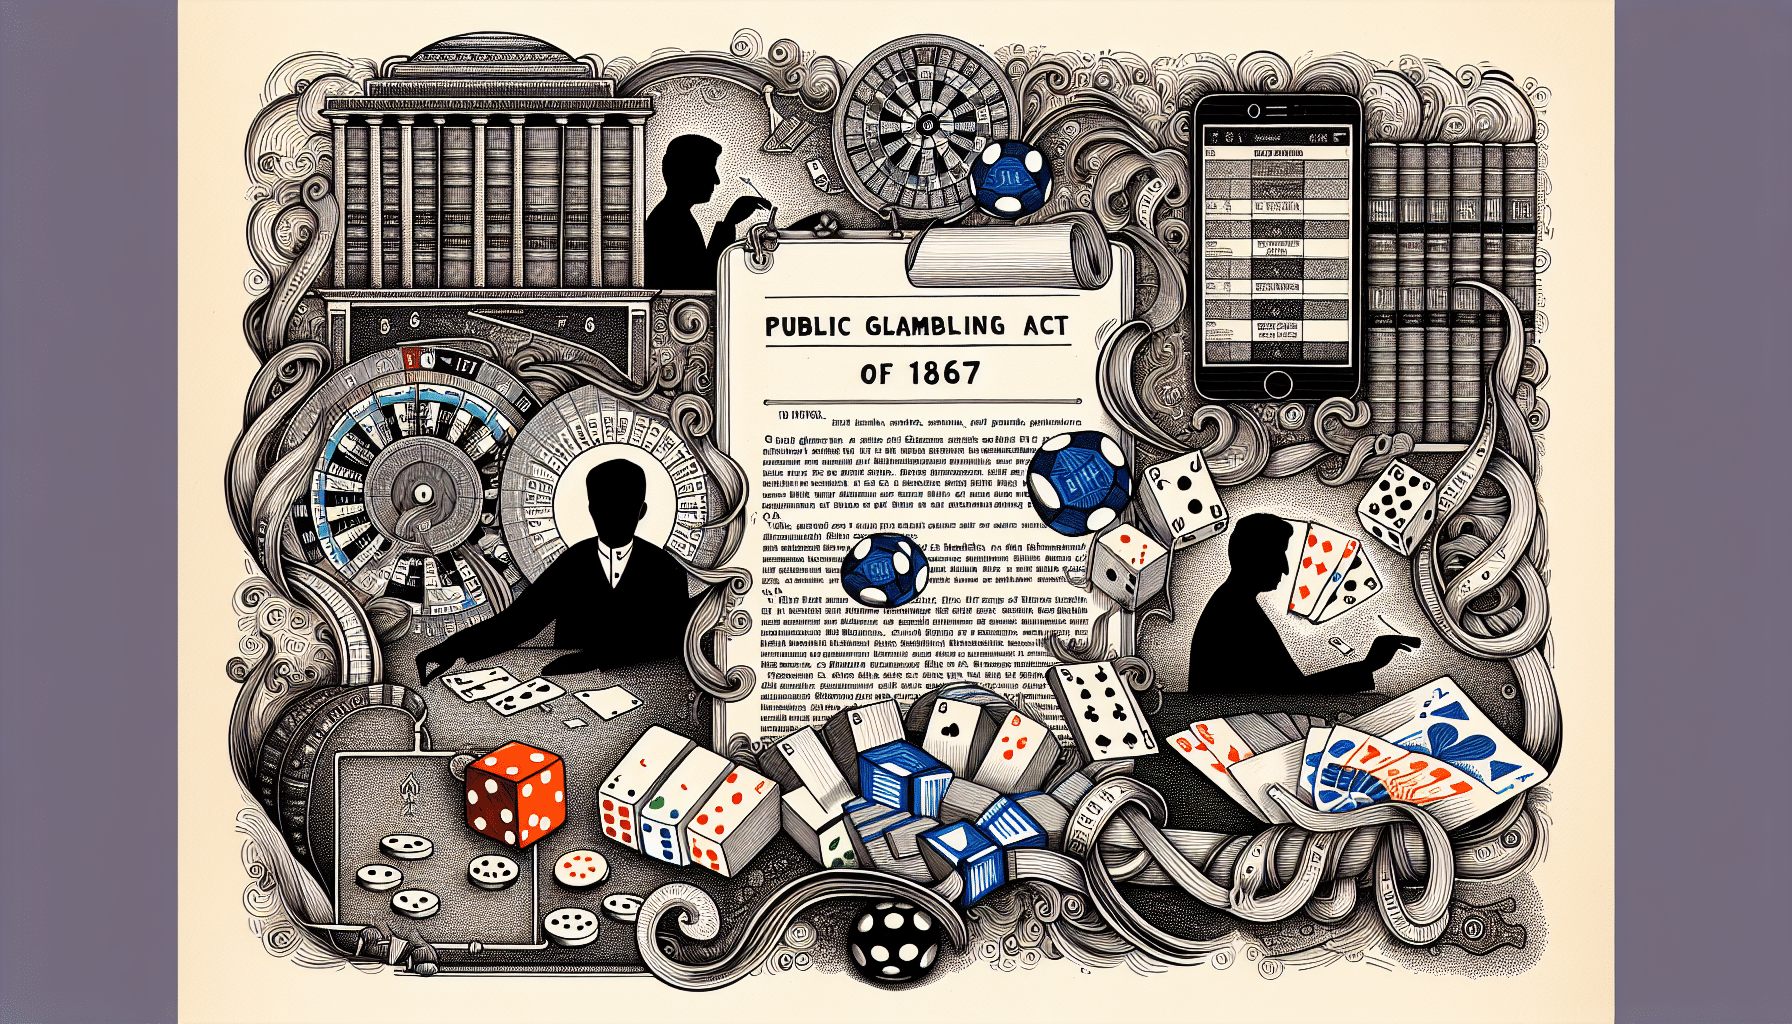 Illustration of the Public Gambling Act of 1867